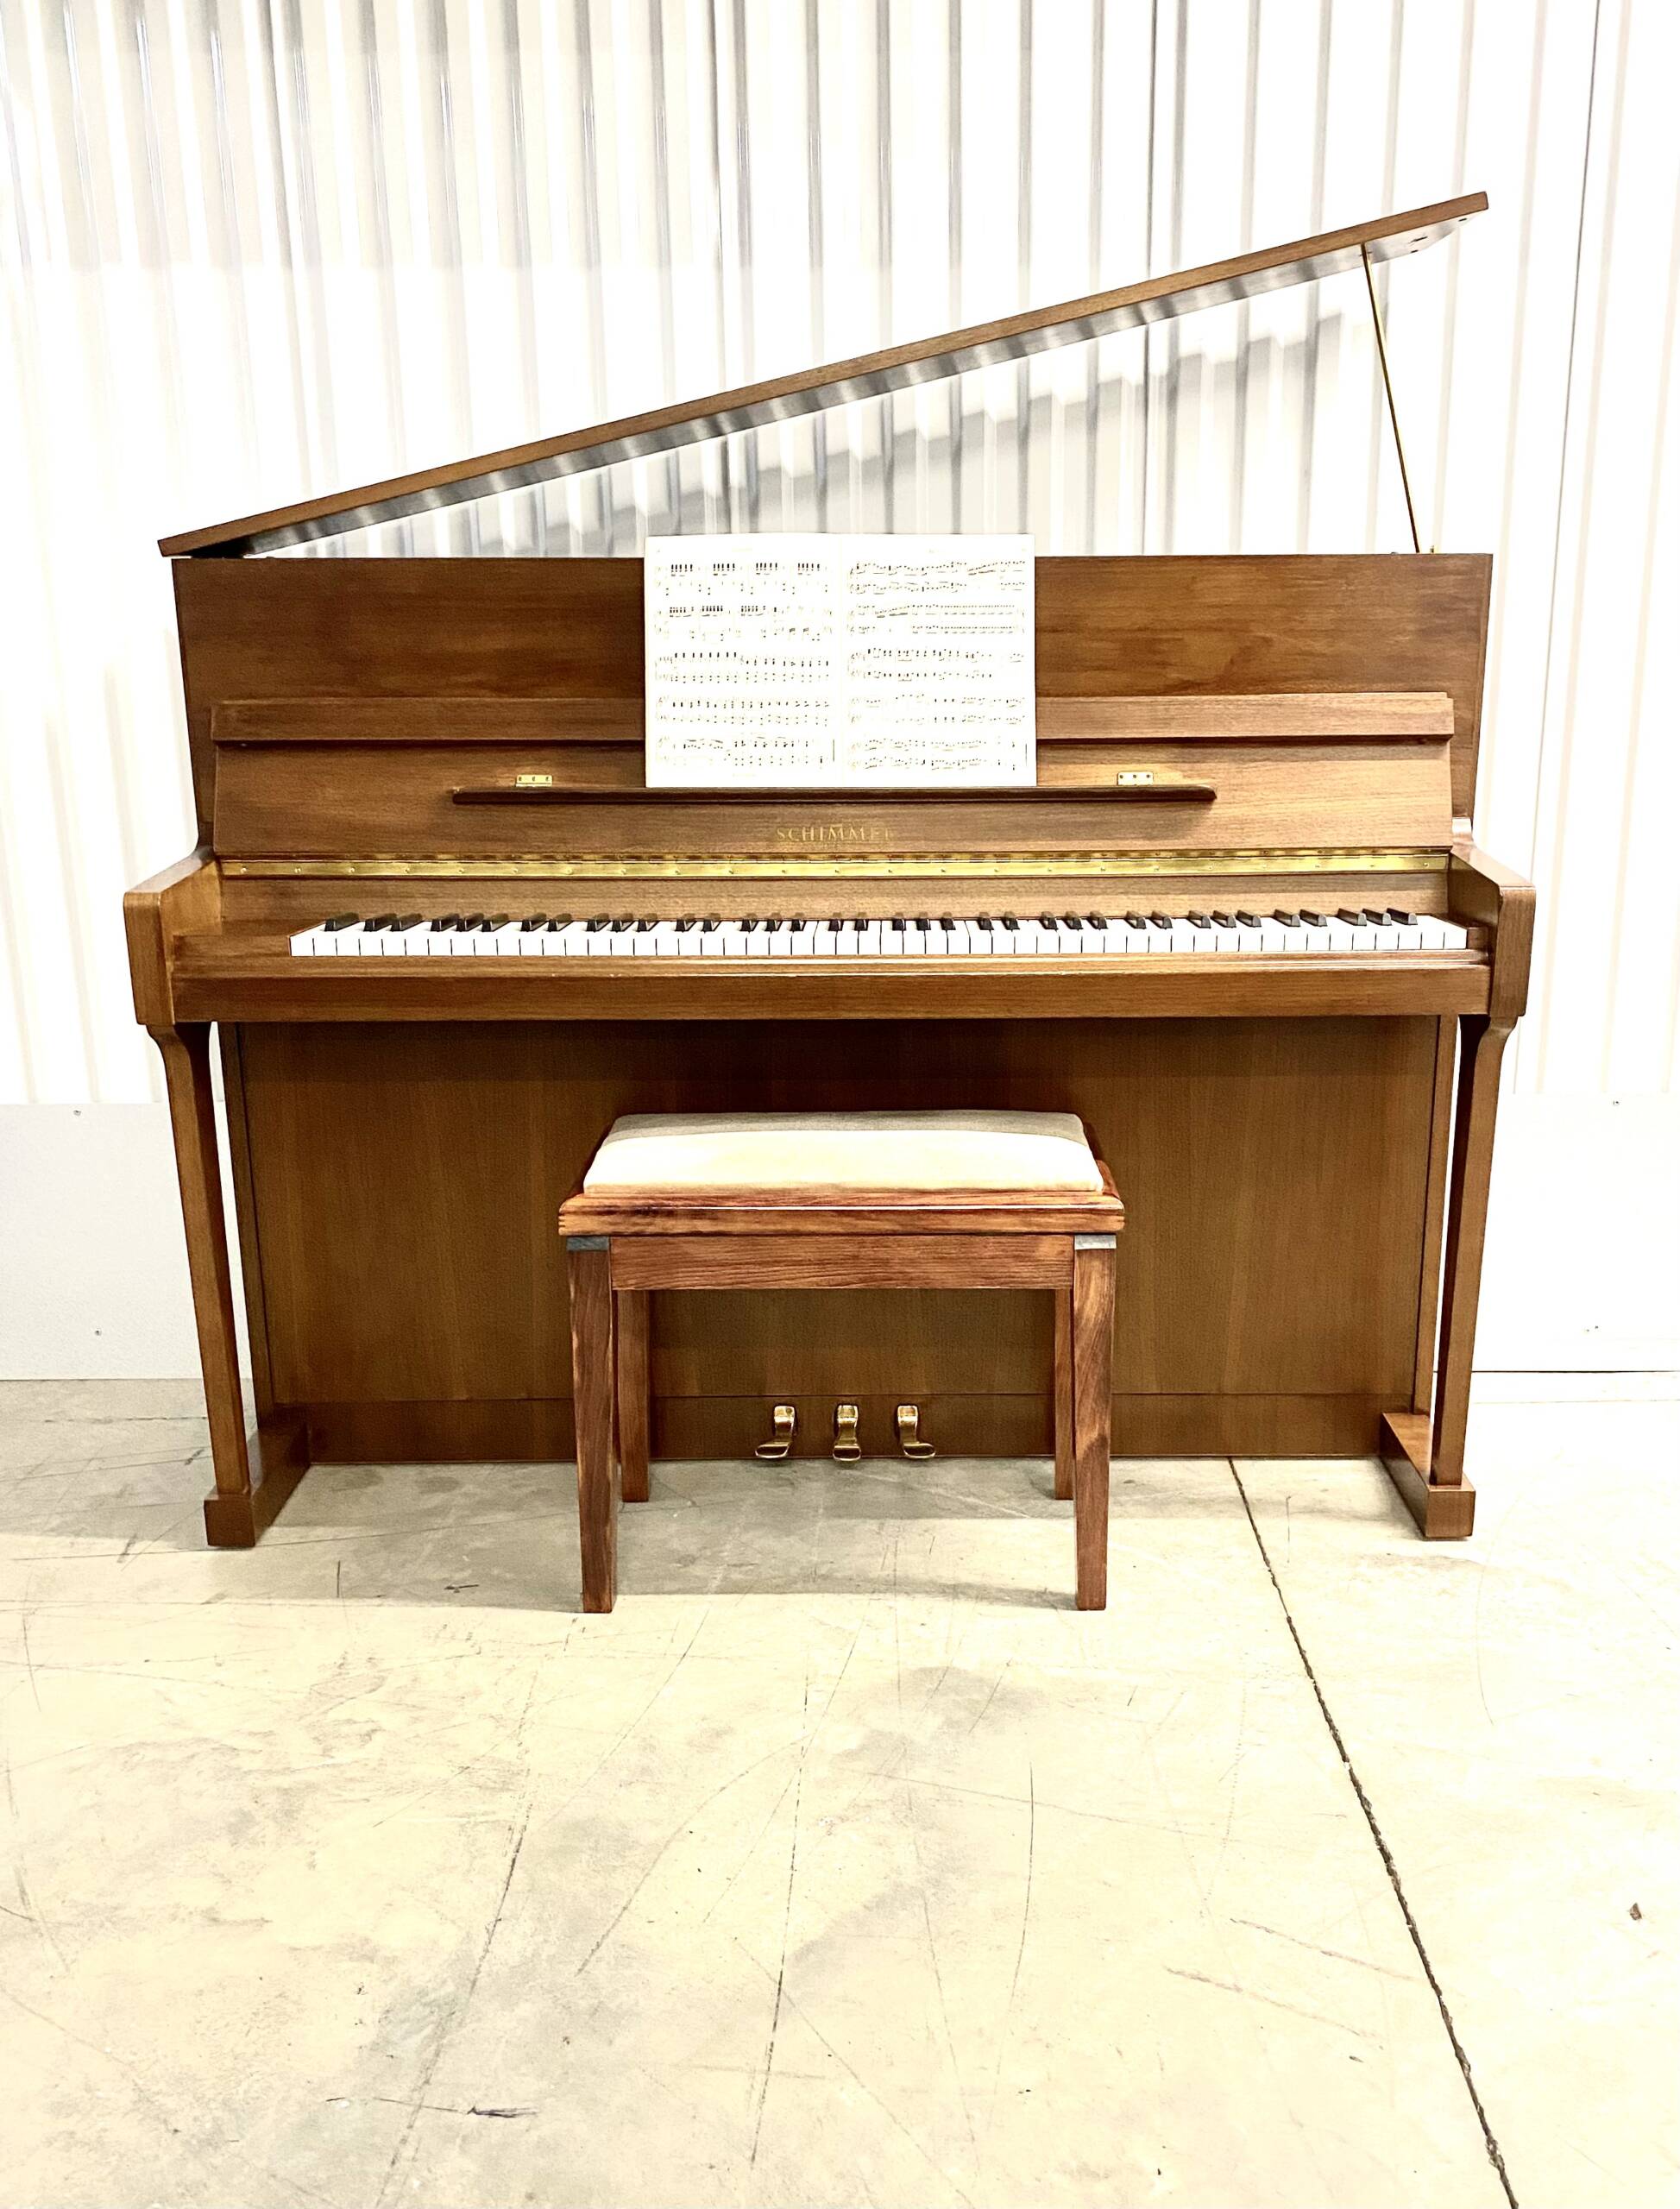 https://pianolobby.co.uk/wp-content/uploads/2023/04/Sch-5-scaled.jpg